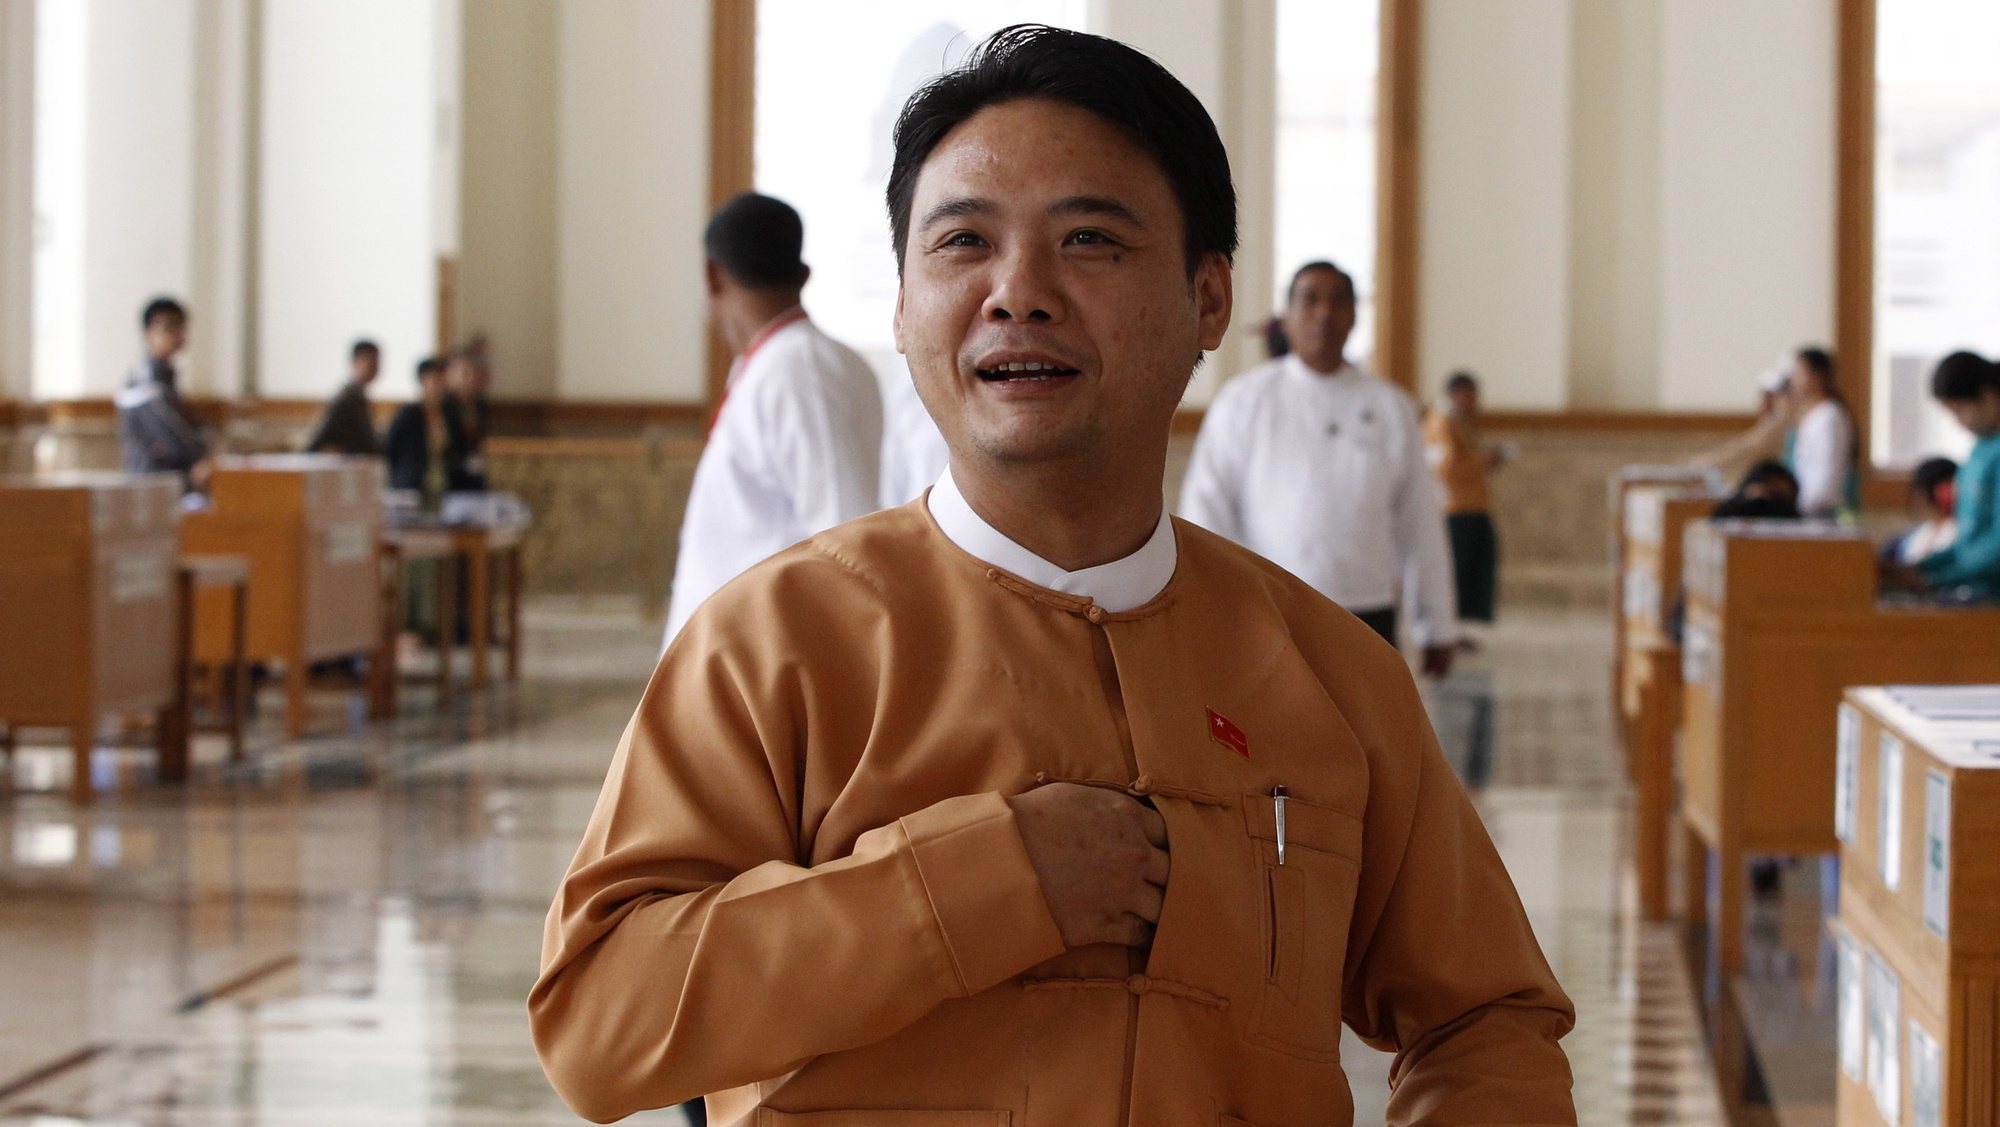 epa10090937 (FILE) - Phyo Zeya Thaw, former law maker of National League for Democracy (NLD) party, at a regular parliament session at Union Parliament in Naypyitaw, capital of Myanmar, 28 January 2016 (reissued 25 July 2022). According to Myanmar state run media, Phyo Zeya Thaw, a hip-hop singer and former law maker of National League for Democracy (NLD) party, was executed for crimes related to the Counter-Terrorism Lay and Penal Code. Three other activists, accused of masterminding the resistance and attacks against the regime, were also allegedly executed.  EPA/STRINGER